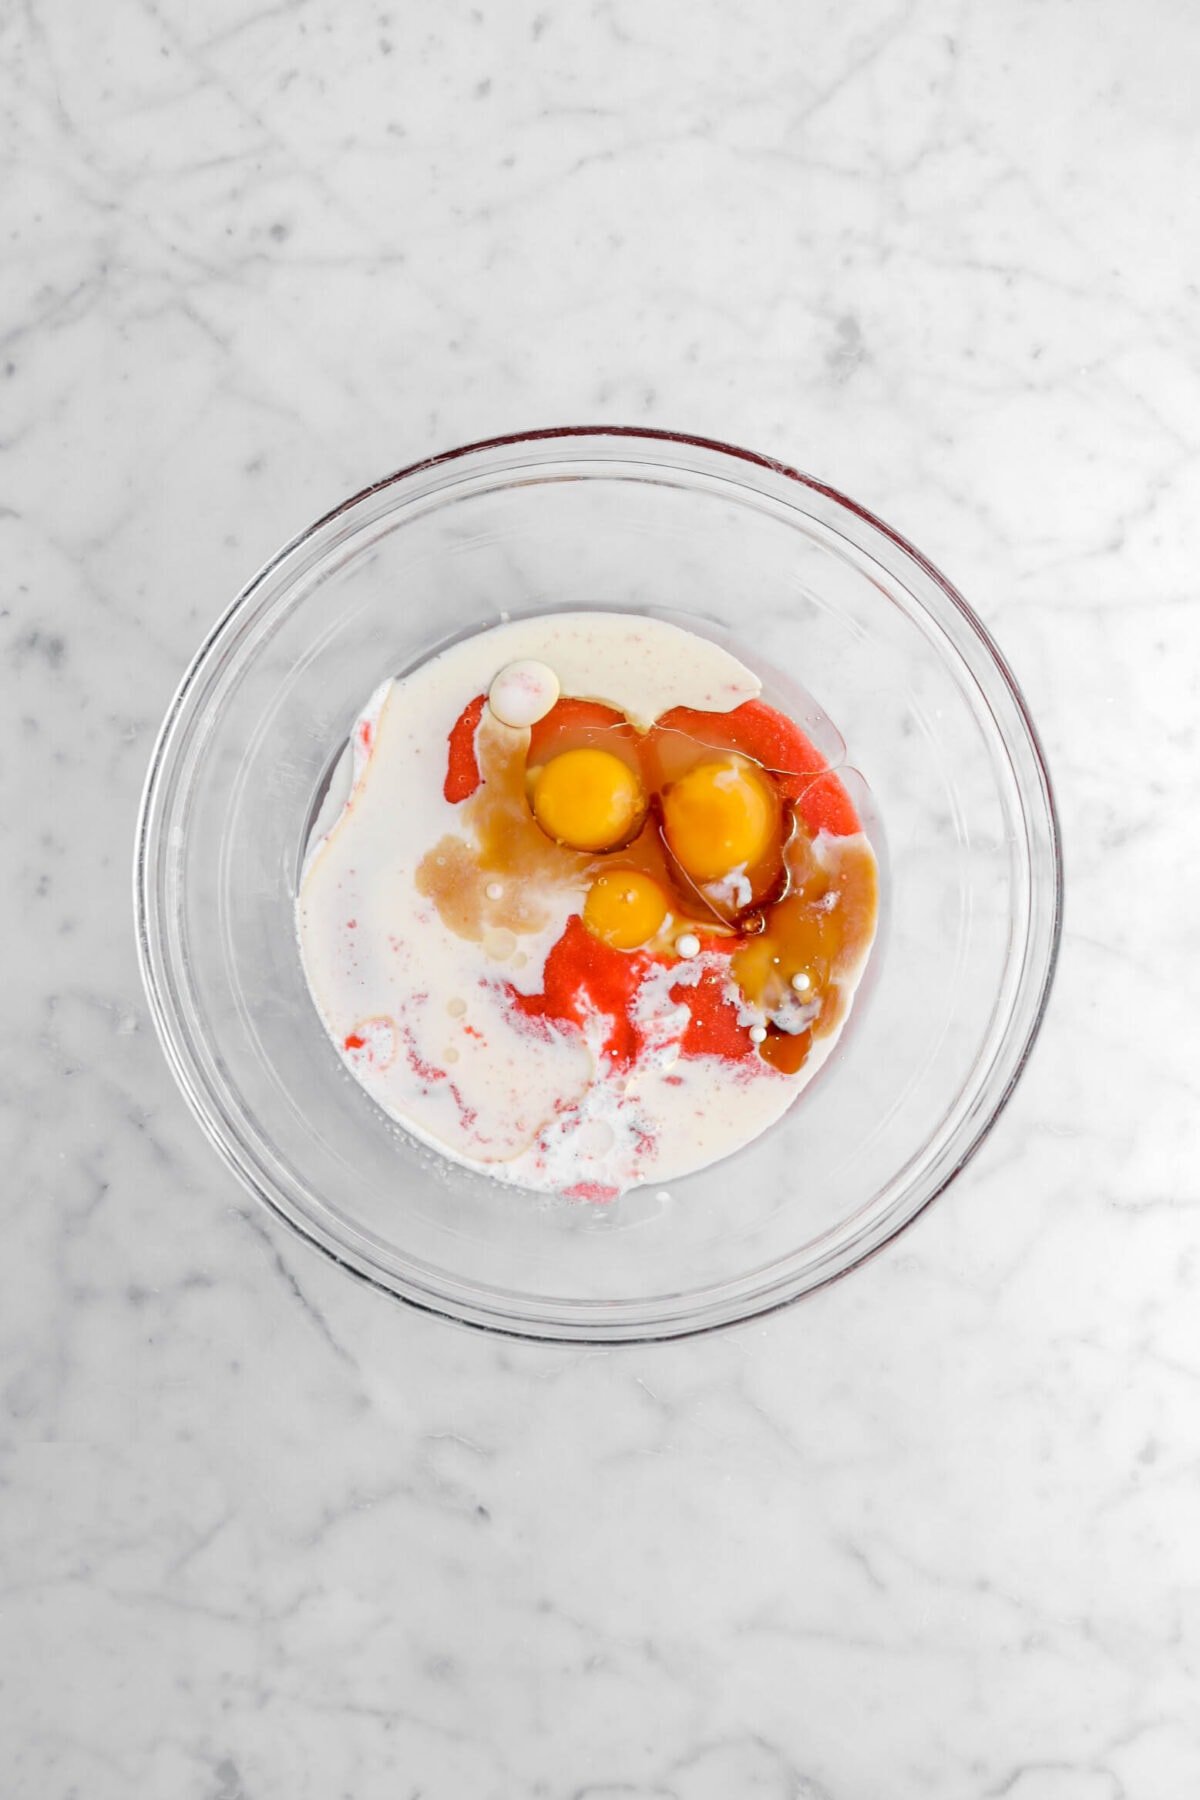 eggs, strawberry purée, oil, and milk in glass bowl.